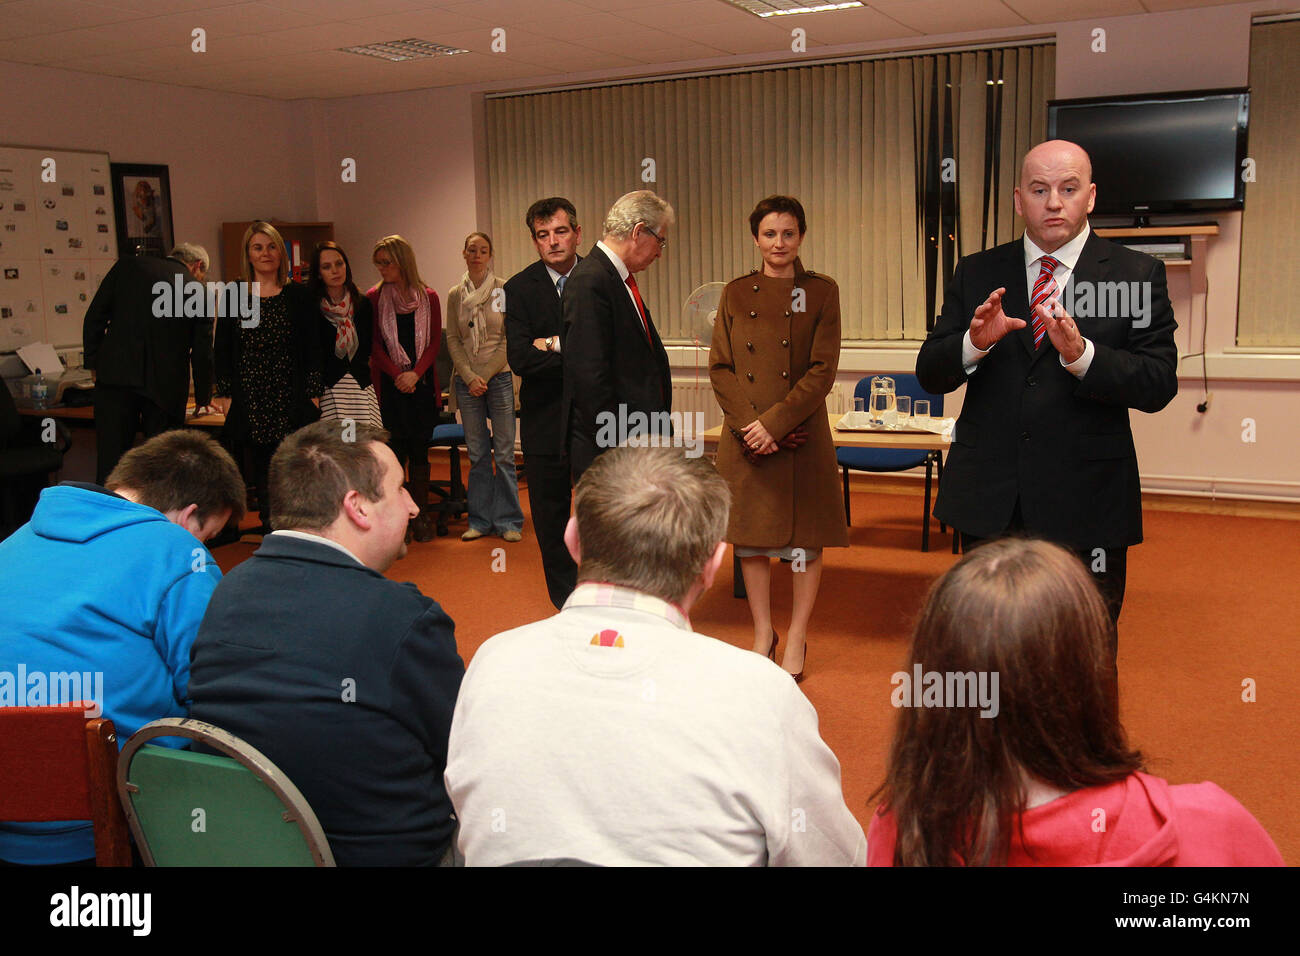 Irish Presidential candidate Sean Gallagher (right) talks with people in the Rehab centre in Cavan on the eve of polling day. Stock Photo